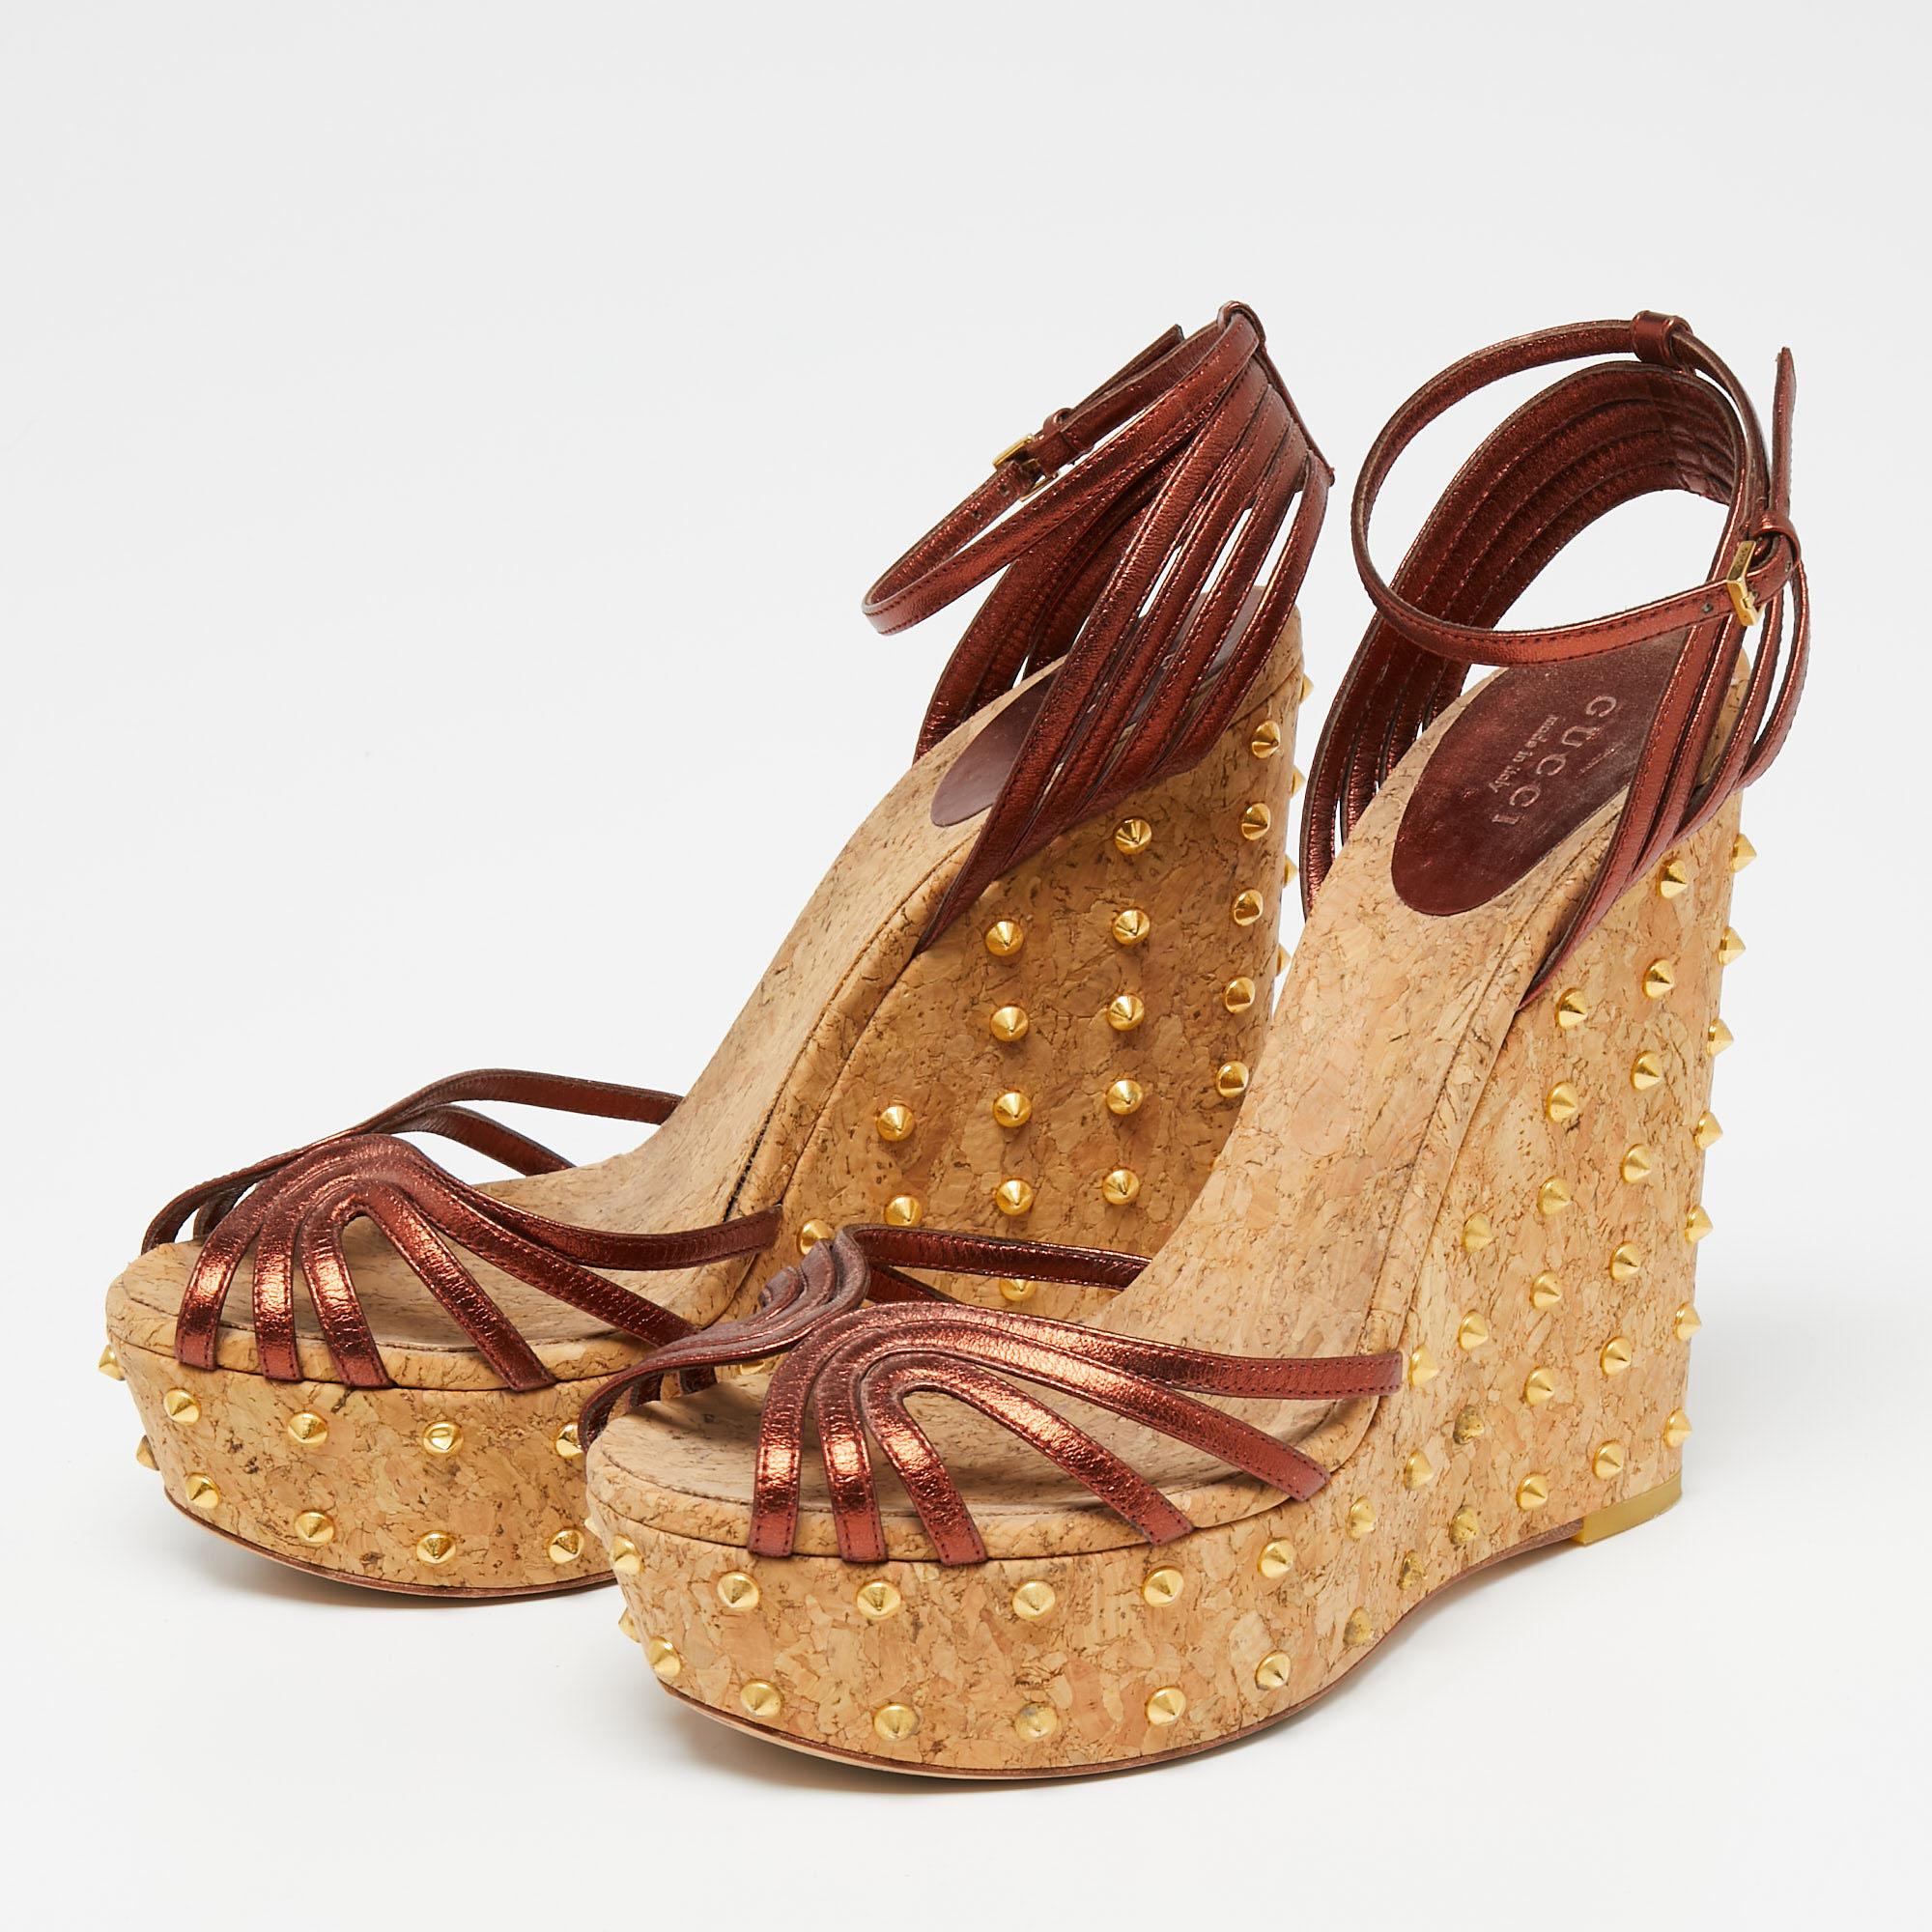 These sandals from Gucci have been designed to lift your style. They flaunt copper-hued leather straps to secure your feet perfectly and are elevated on studded cork wedge heels. Pair them with a dress for a fashionable brunch outing and get set to